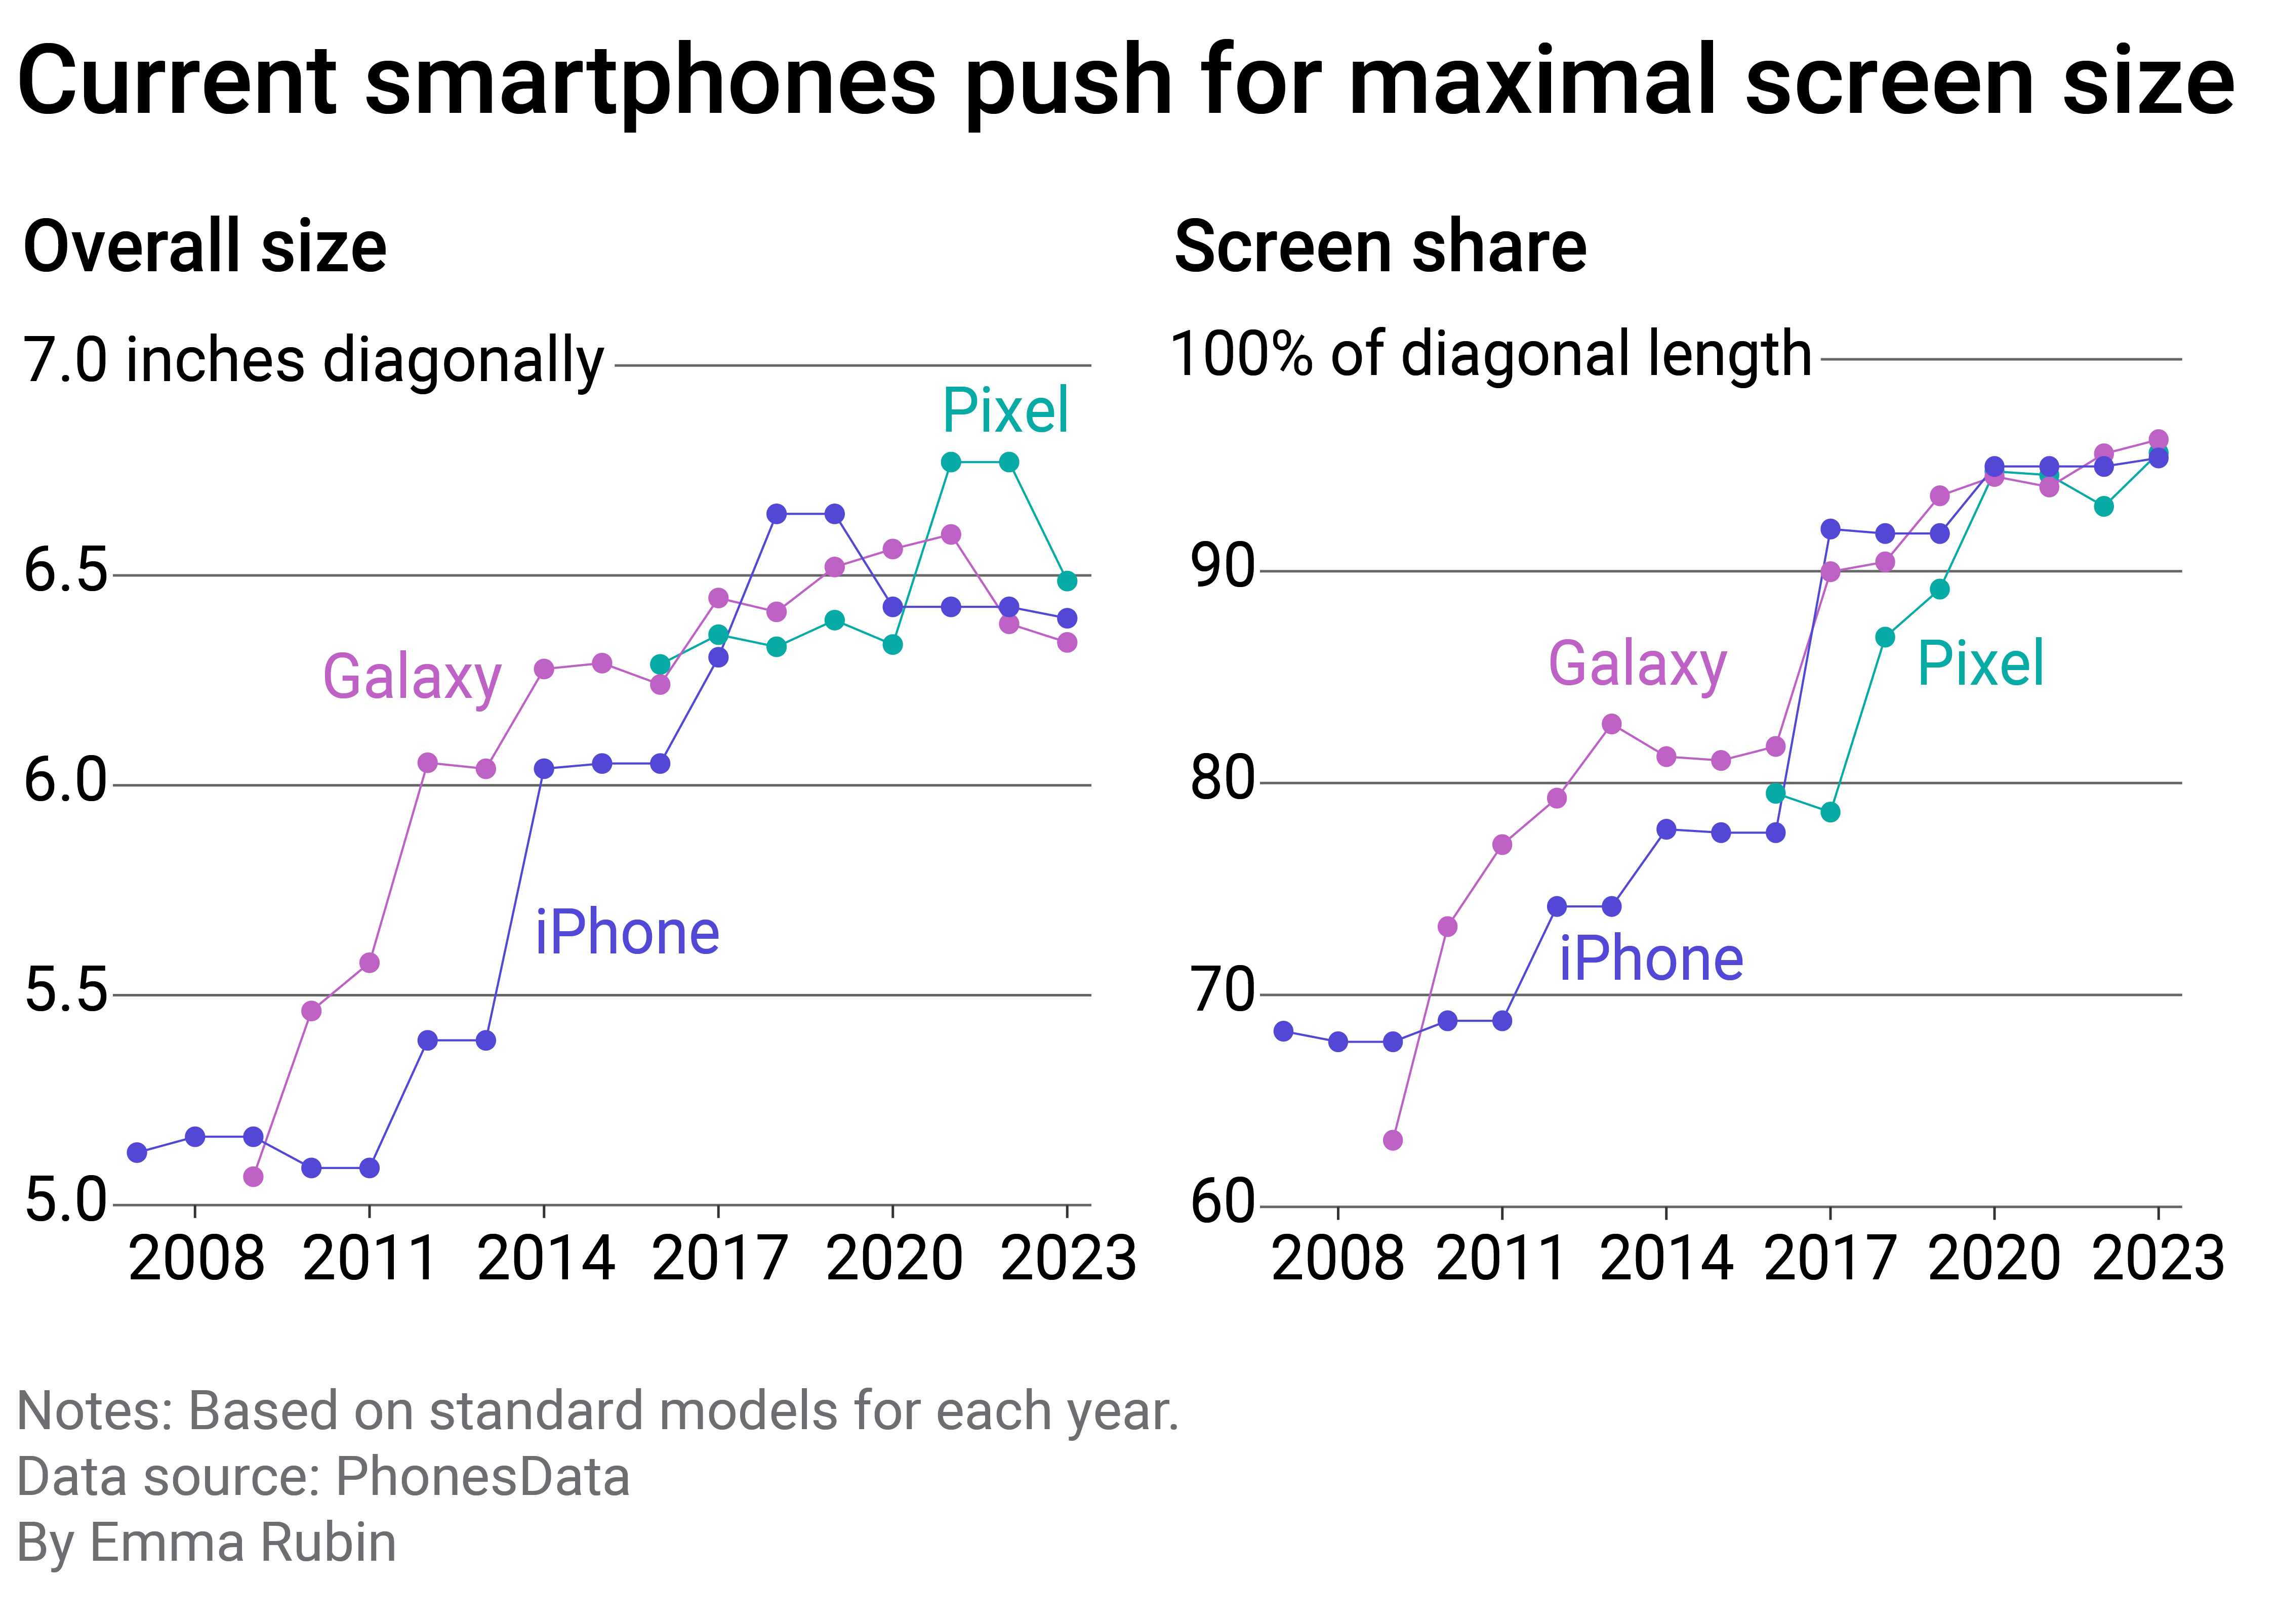 Two charts showing how overall phone size and screen share have changed for Pixel, Galaxy, and iPhone phones since 2008.